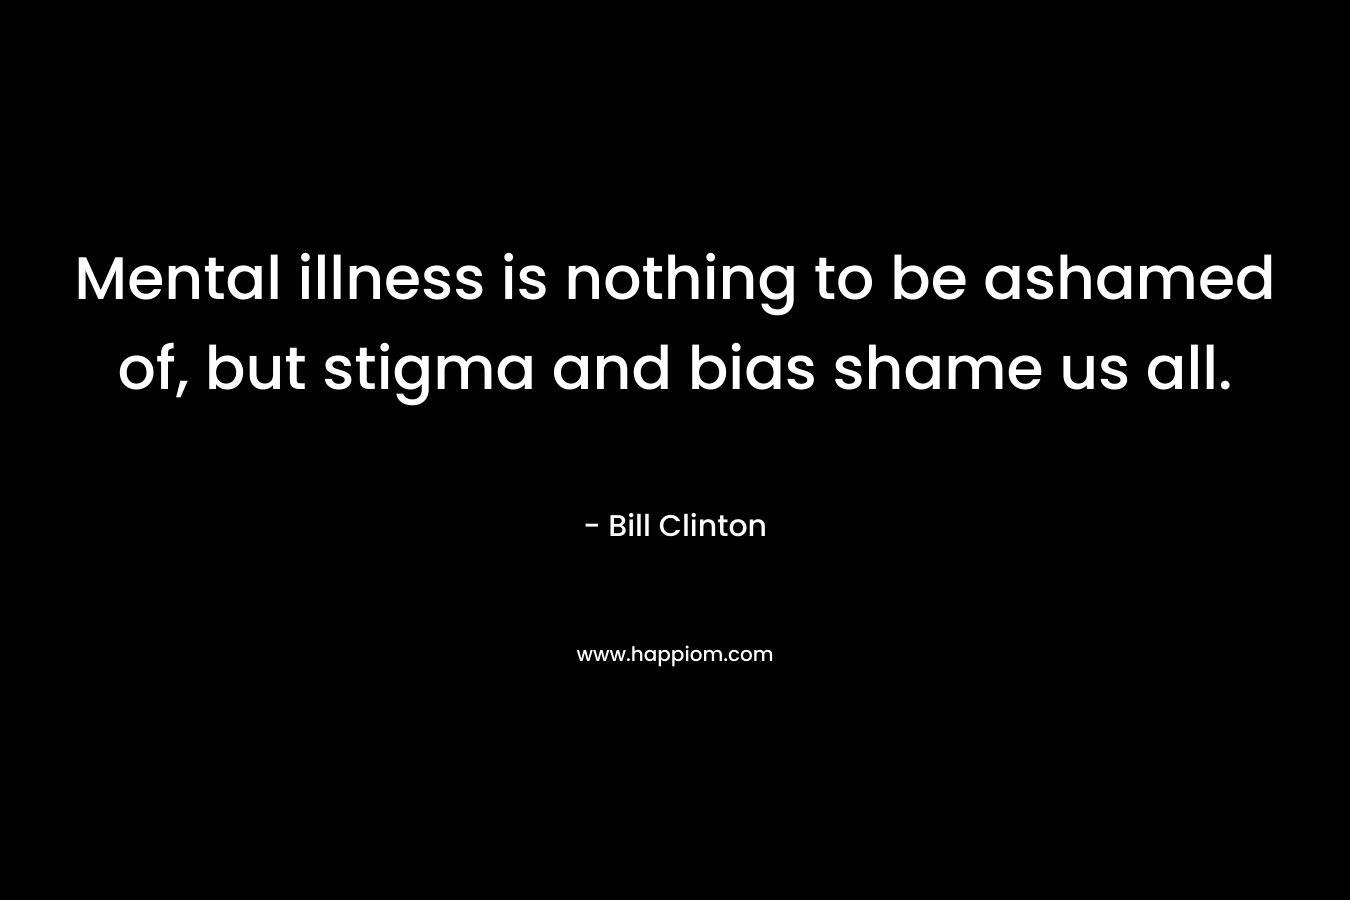 Mental illness is nothing to be ashamed of, but stigma and bias shame us all. – Bill Clinton